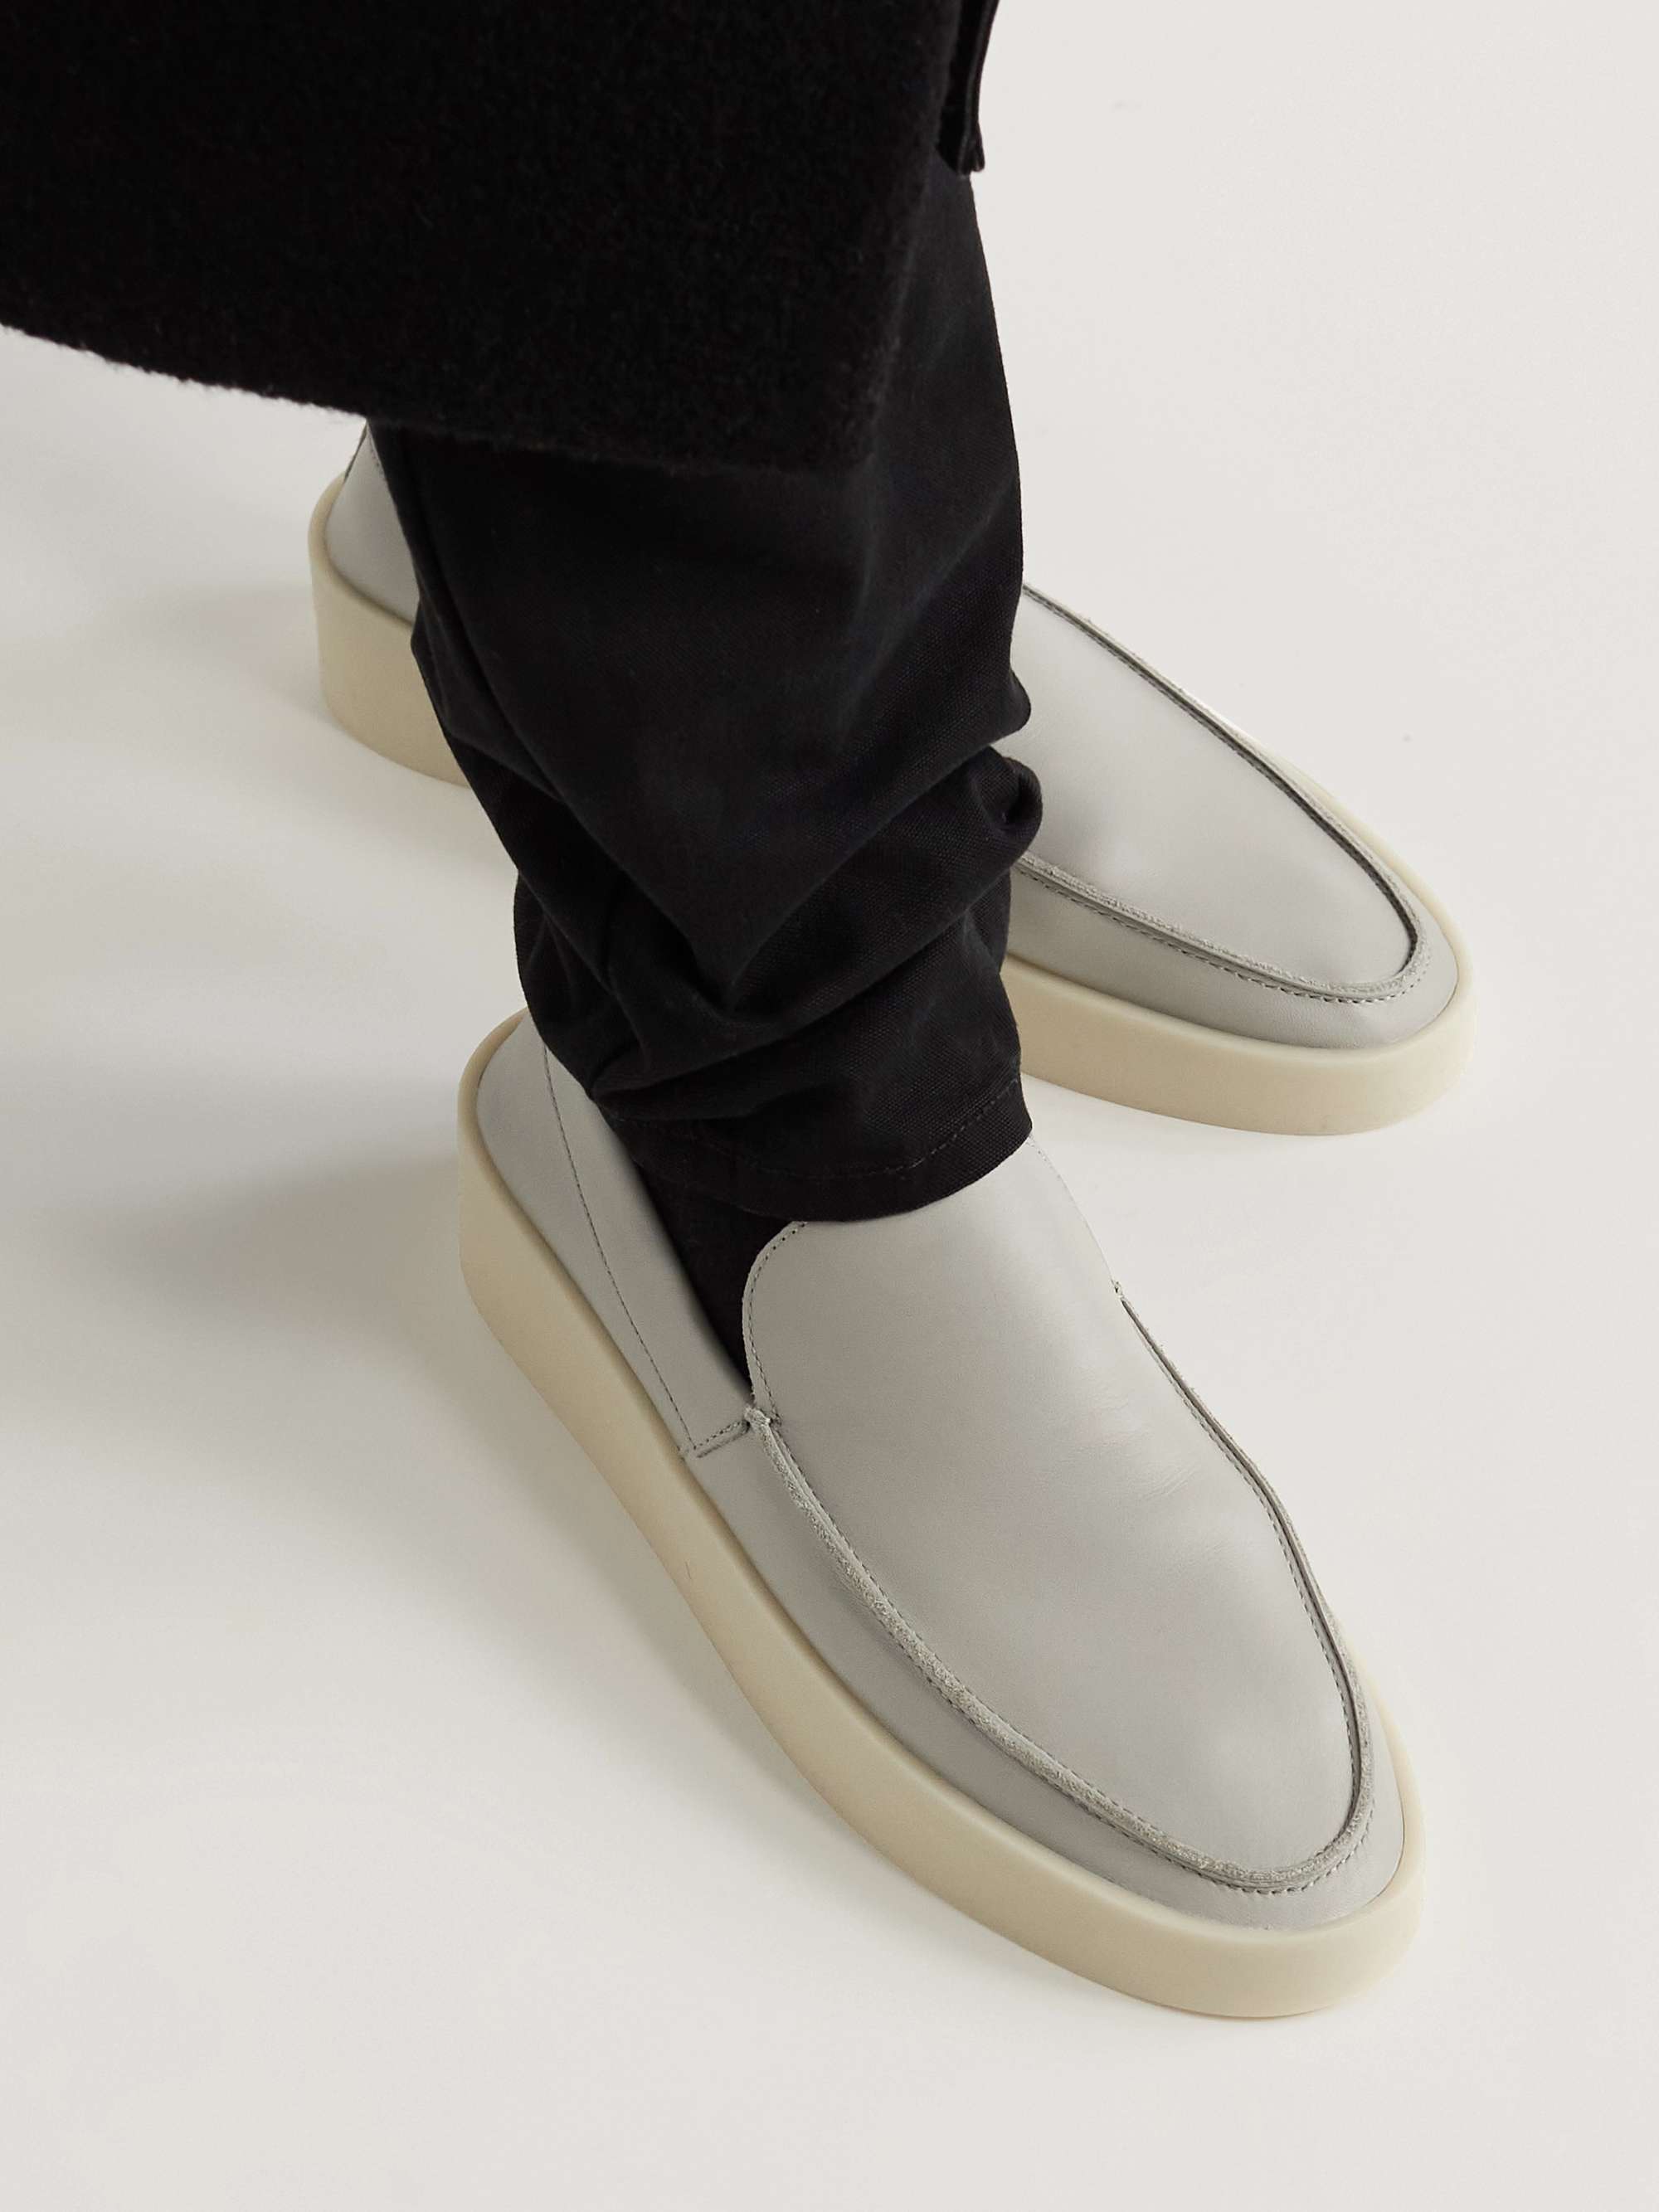 FEAR OF GOD Leather Loafers